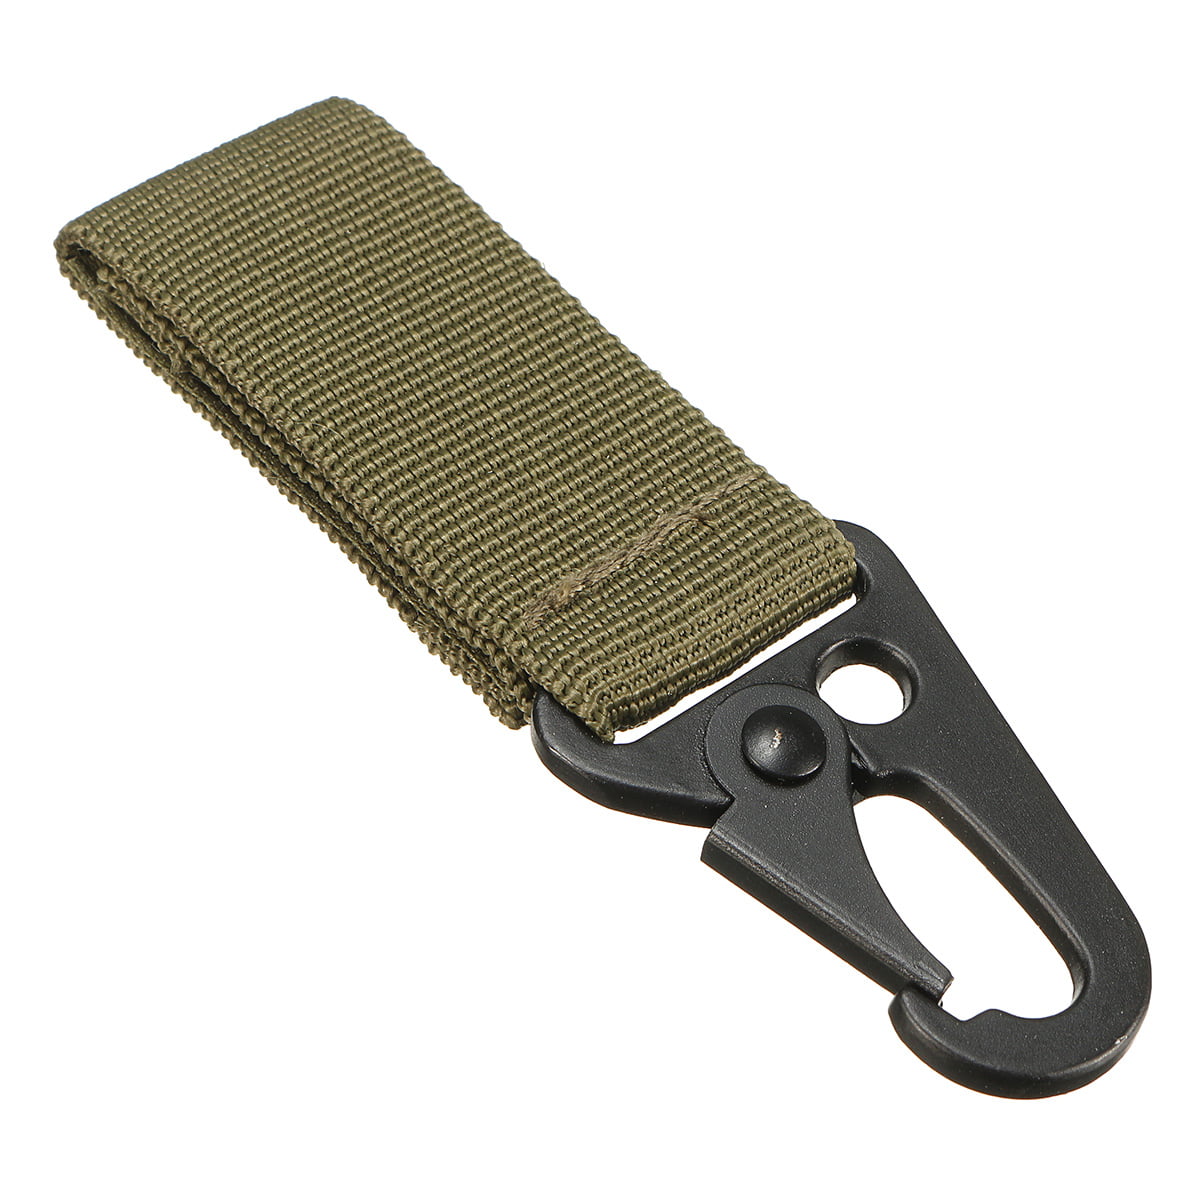 Details about   Tactical Camping Molle Key Ring Nylon Webbing Keychain Clip Buckle Outdoor Hook